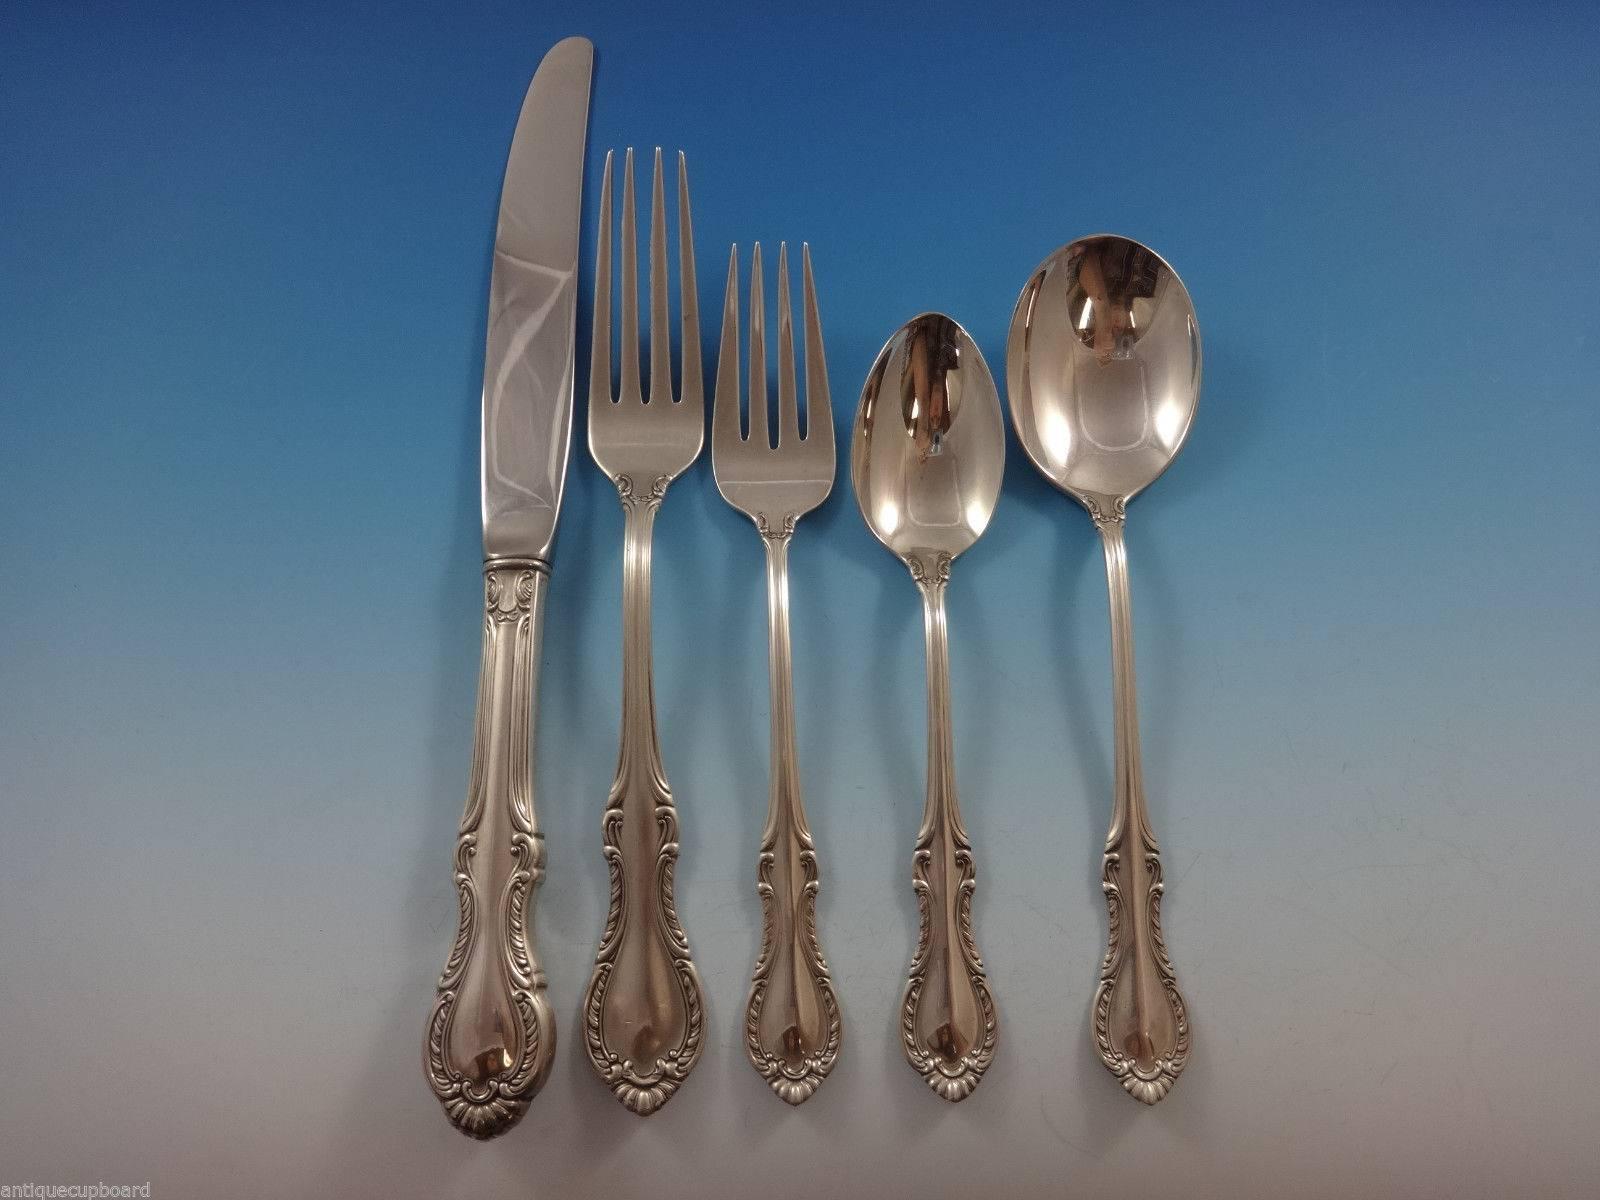 Gorgeous Southern colonial by International sterling silver flatware set of 44 pieces. This set includes:

Eight knives, 9 1/4